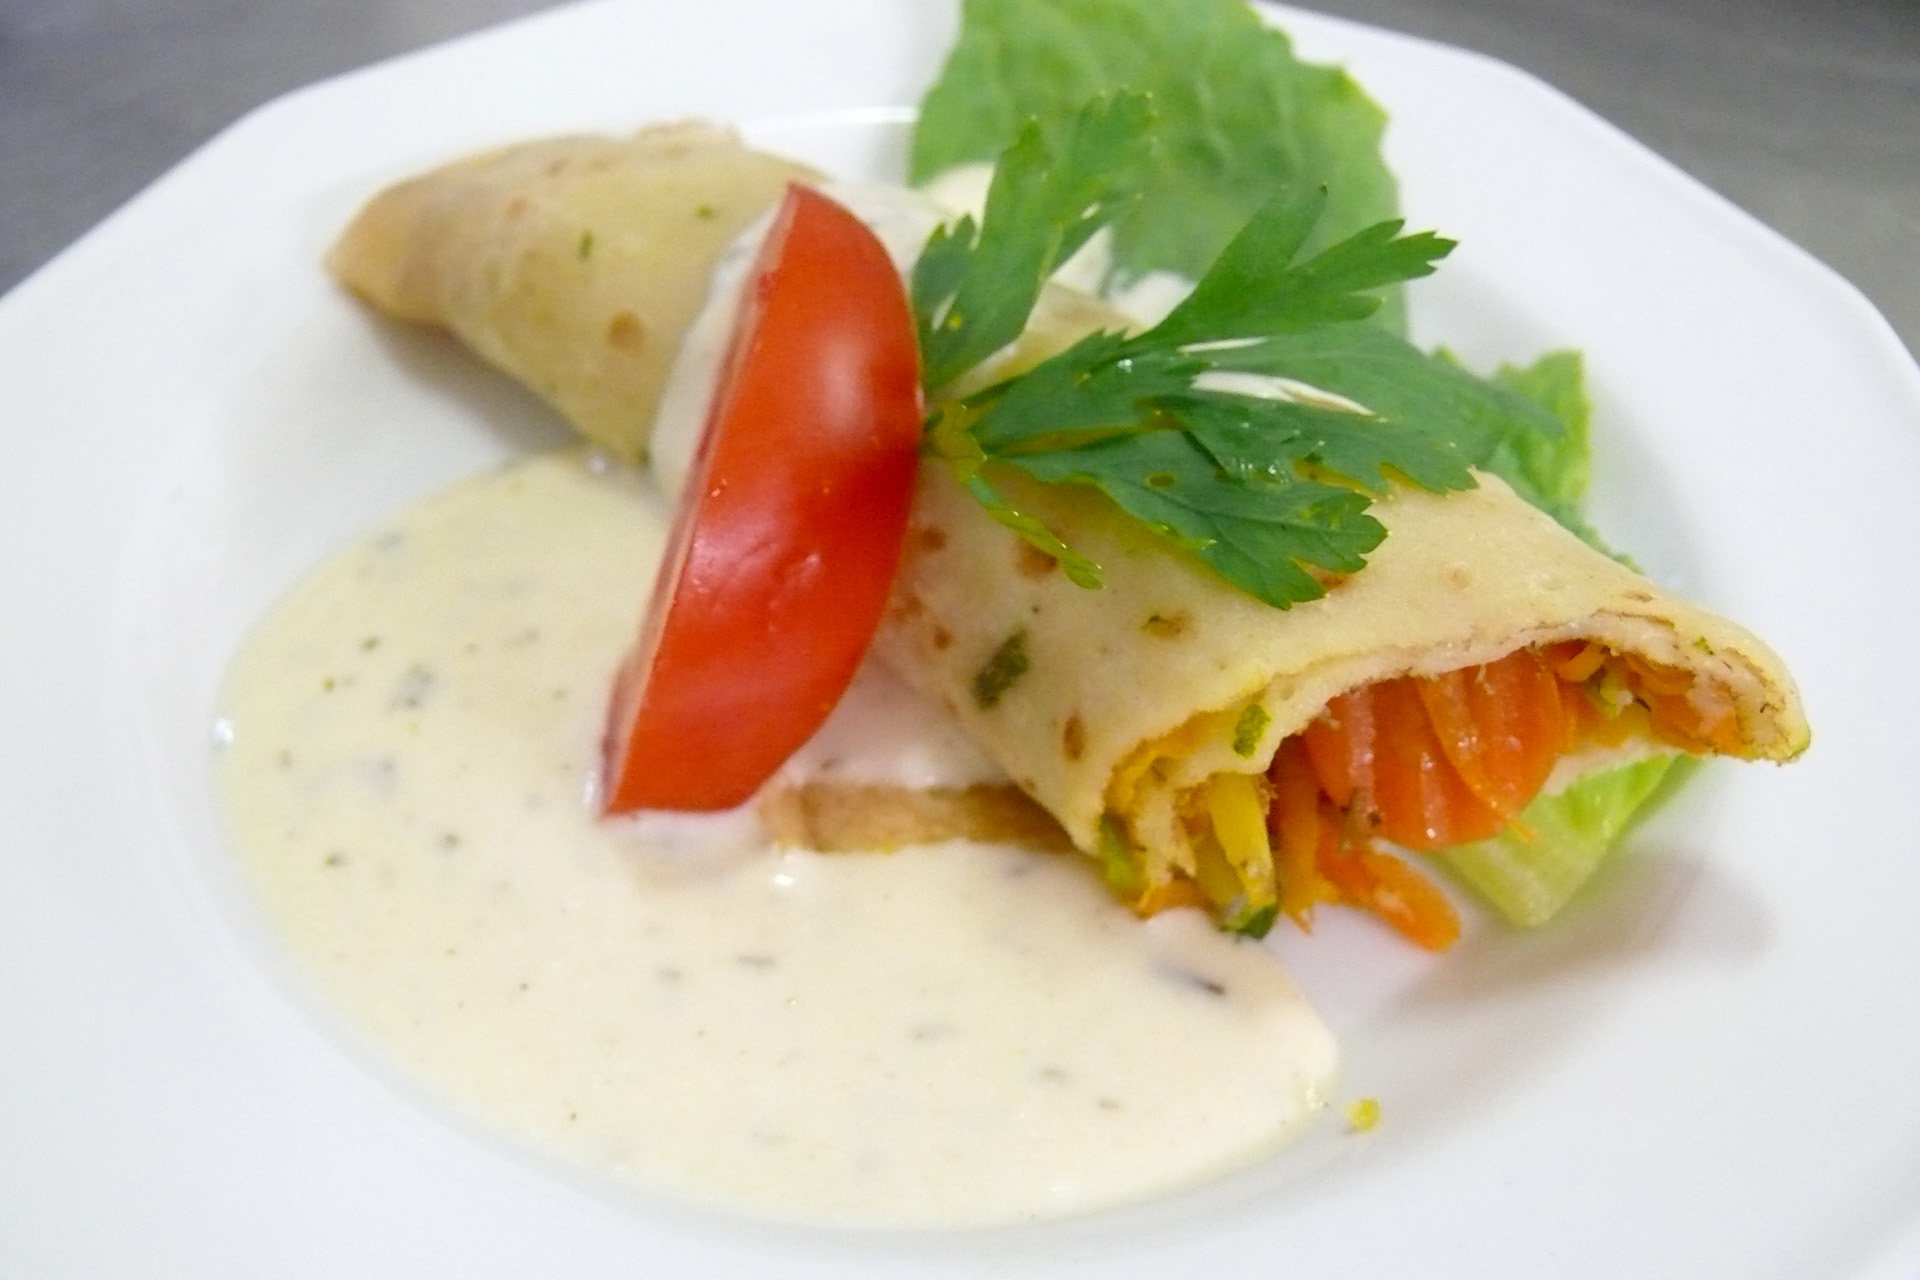 Vegetable pancake with cheese sauce